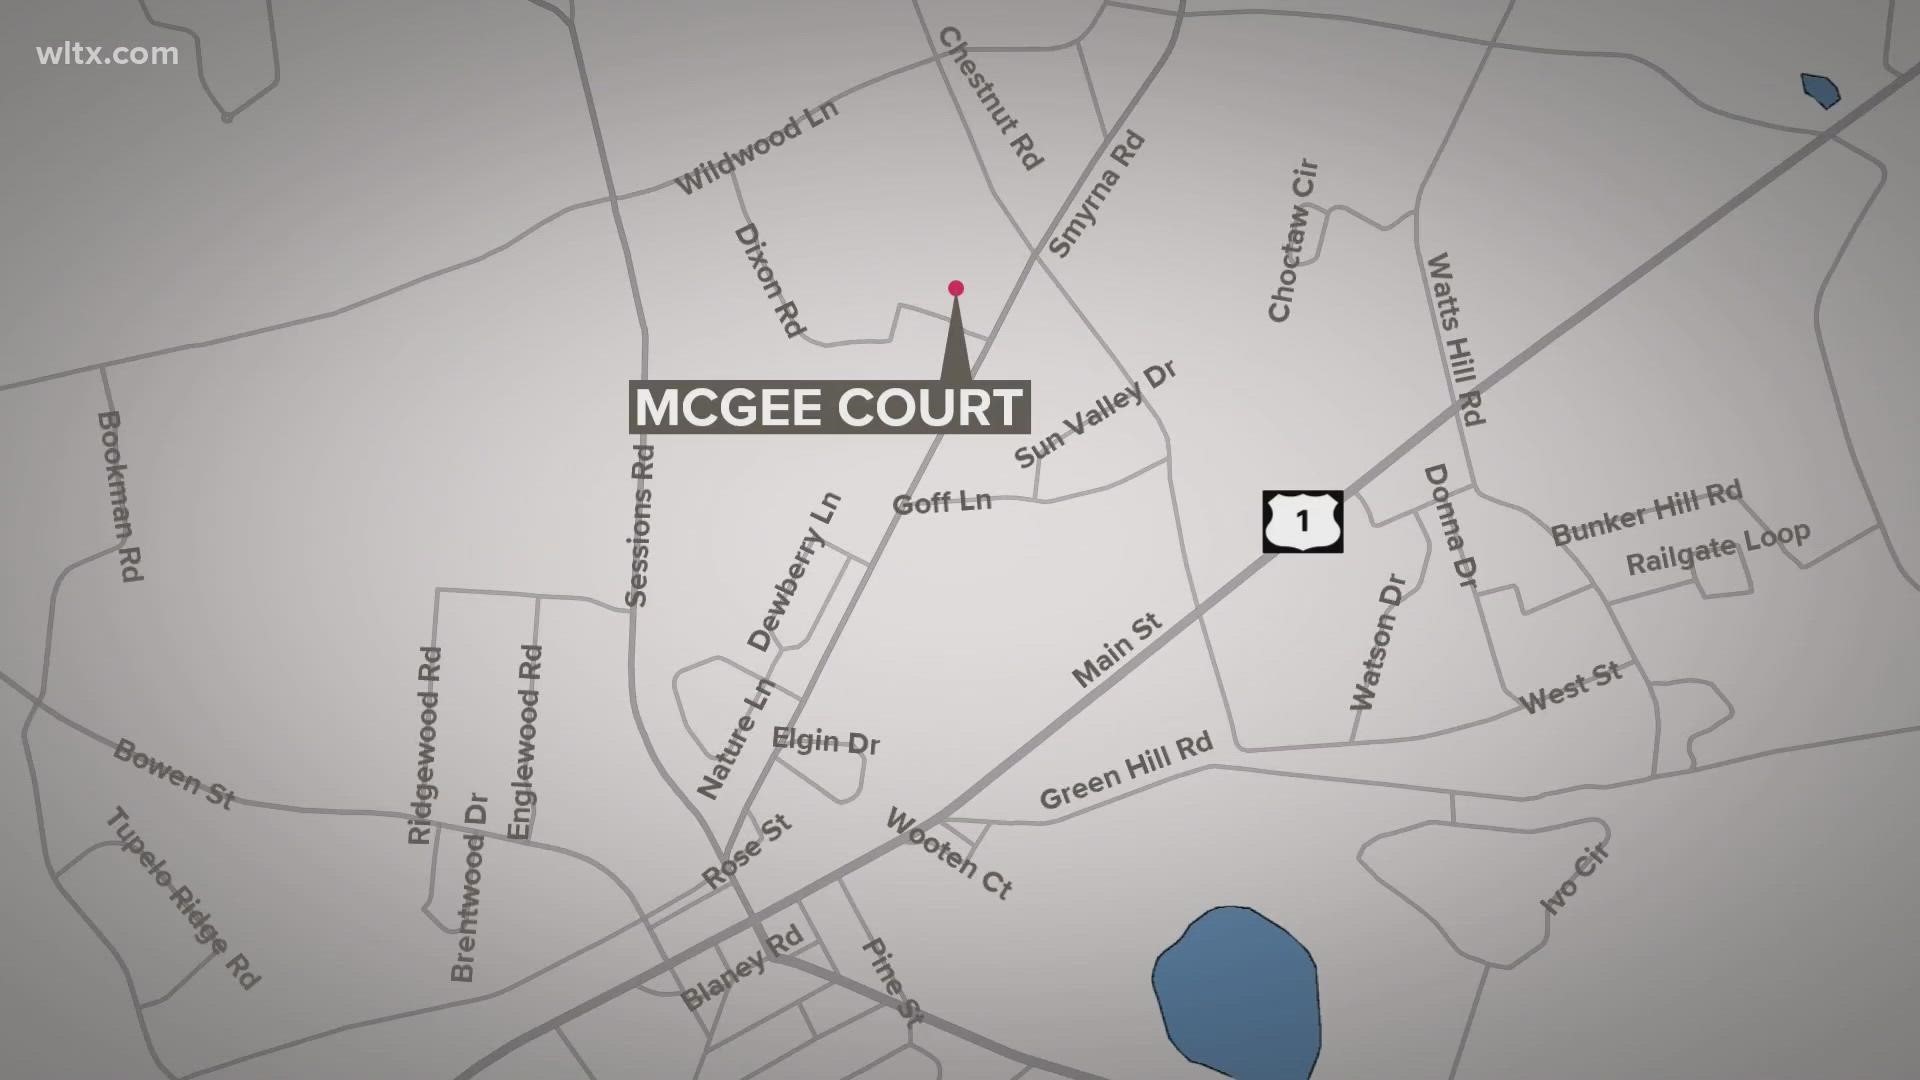 The stabbing took place at McGee Court in Elgin around 4:45pm this afternoon.